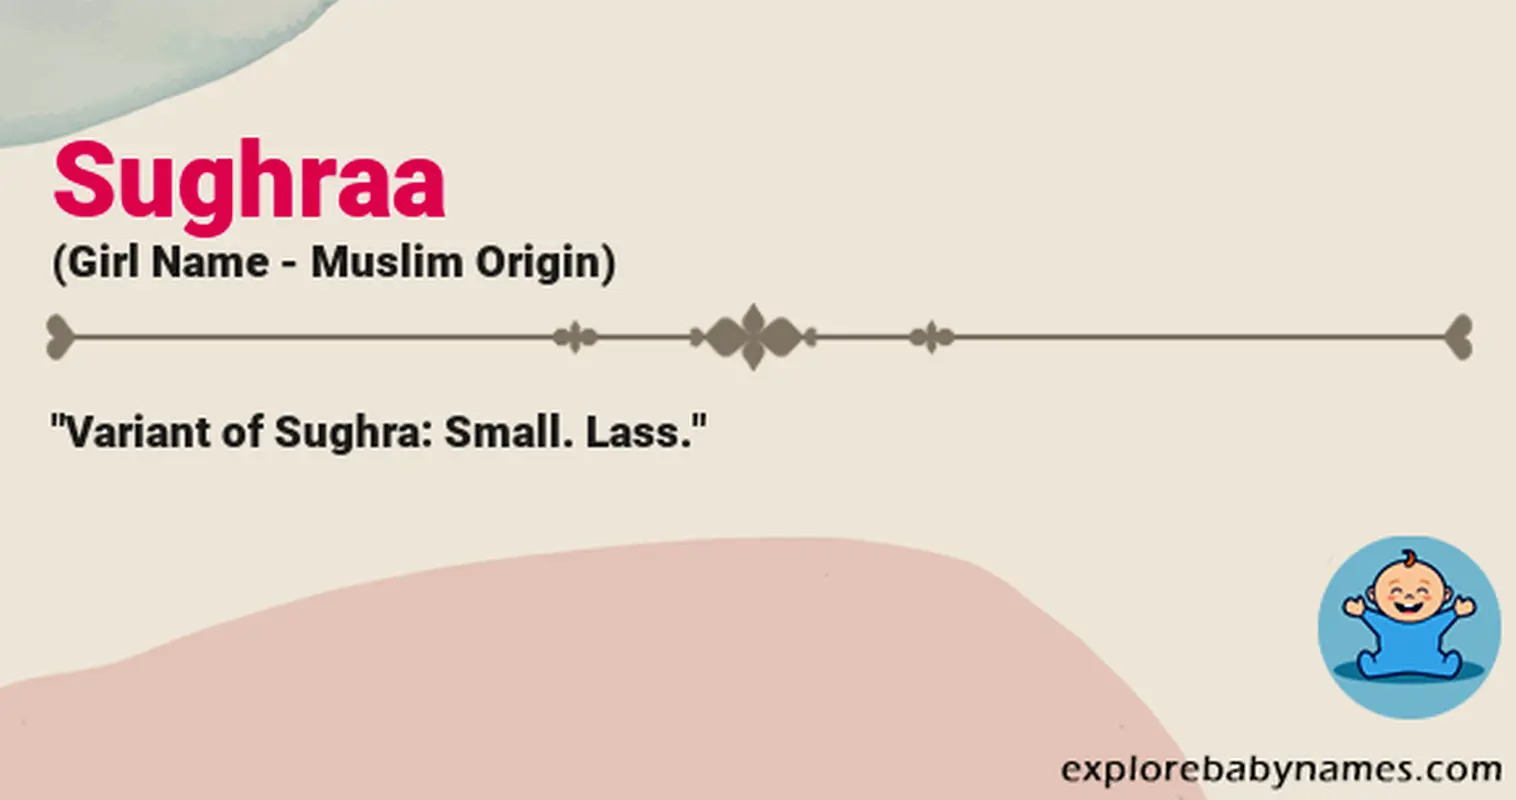 Meaning of Sughraa